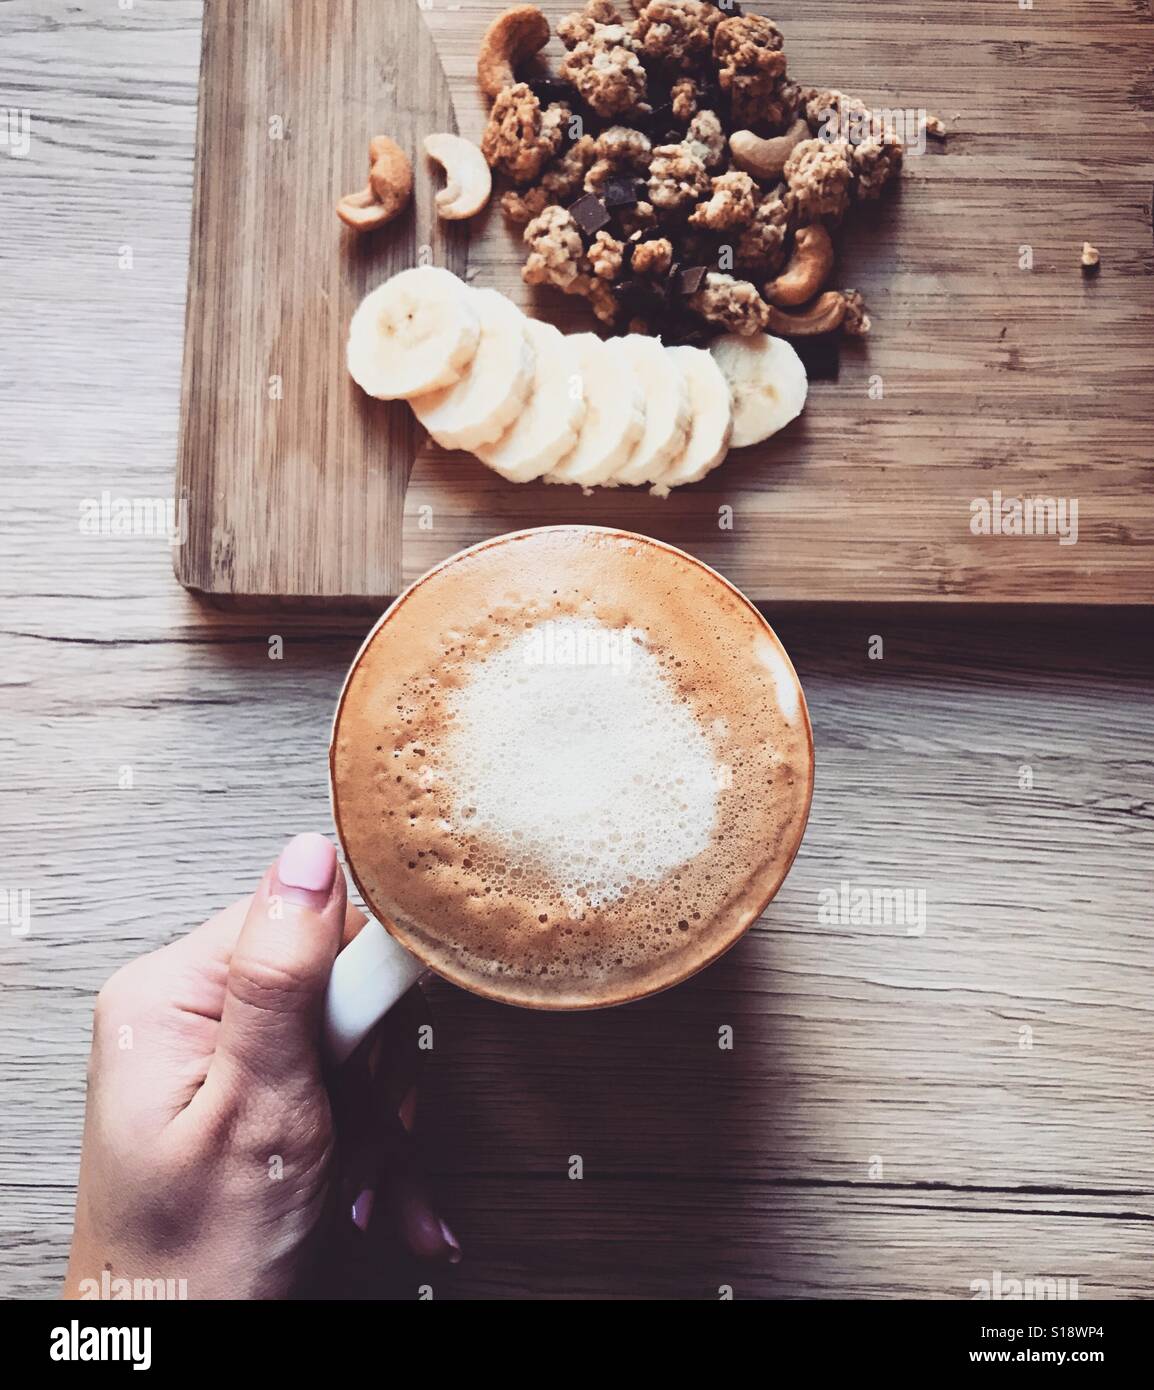 Morning coffee. Banana and cereal on a wooden plate and a mug of hot coffee. Breakfast table Stock Photo